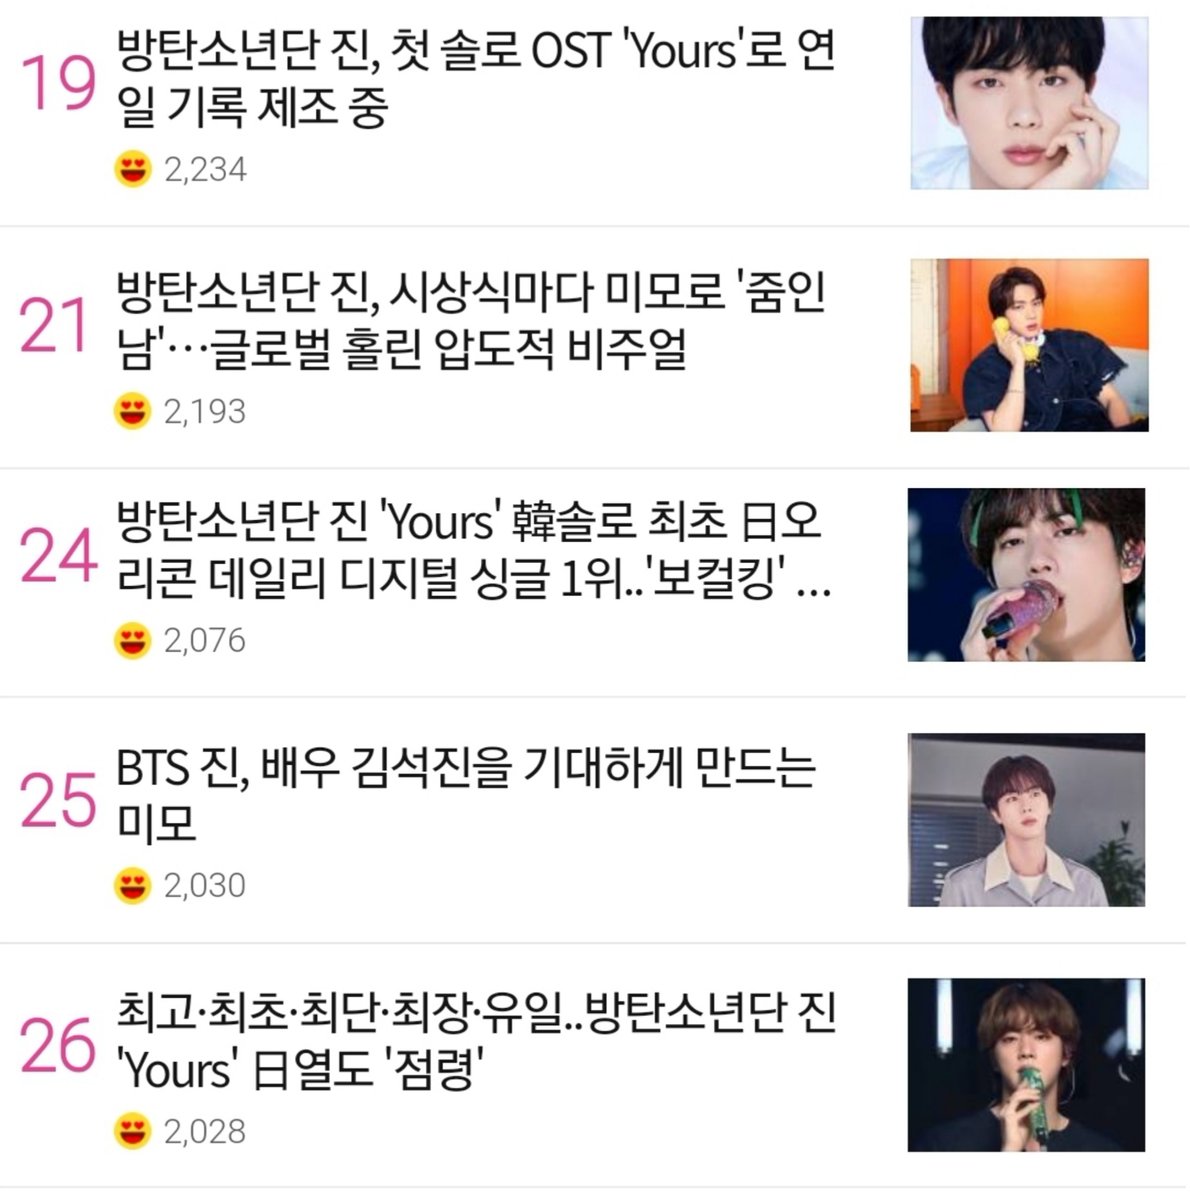 #SeokjinTrends 211127 3pm kst Naver ranking: #19 #21 #24 #25 #26 in most liked article like, recommend 🔗naver.me/G40BfSoS 🔗naver.me/IMVh6rjm 🔗naver.me/FFQsD3PM 🔗naver.me/506aNmmf 🔗naver.me/GDX1MDgw 🔗naver.me/5YiDyQ4n #Jin #SEOKJIN